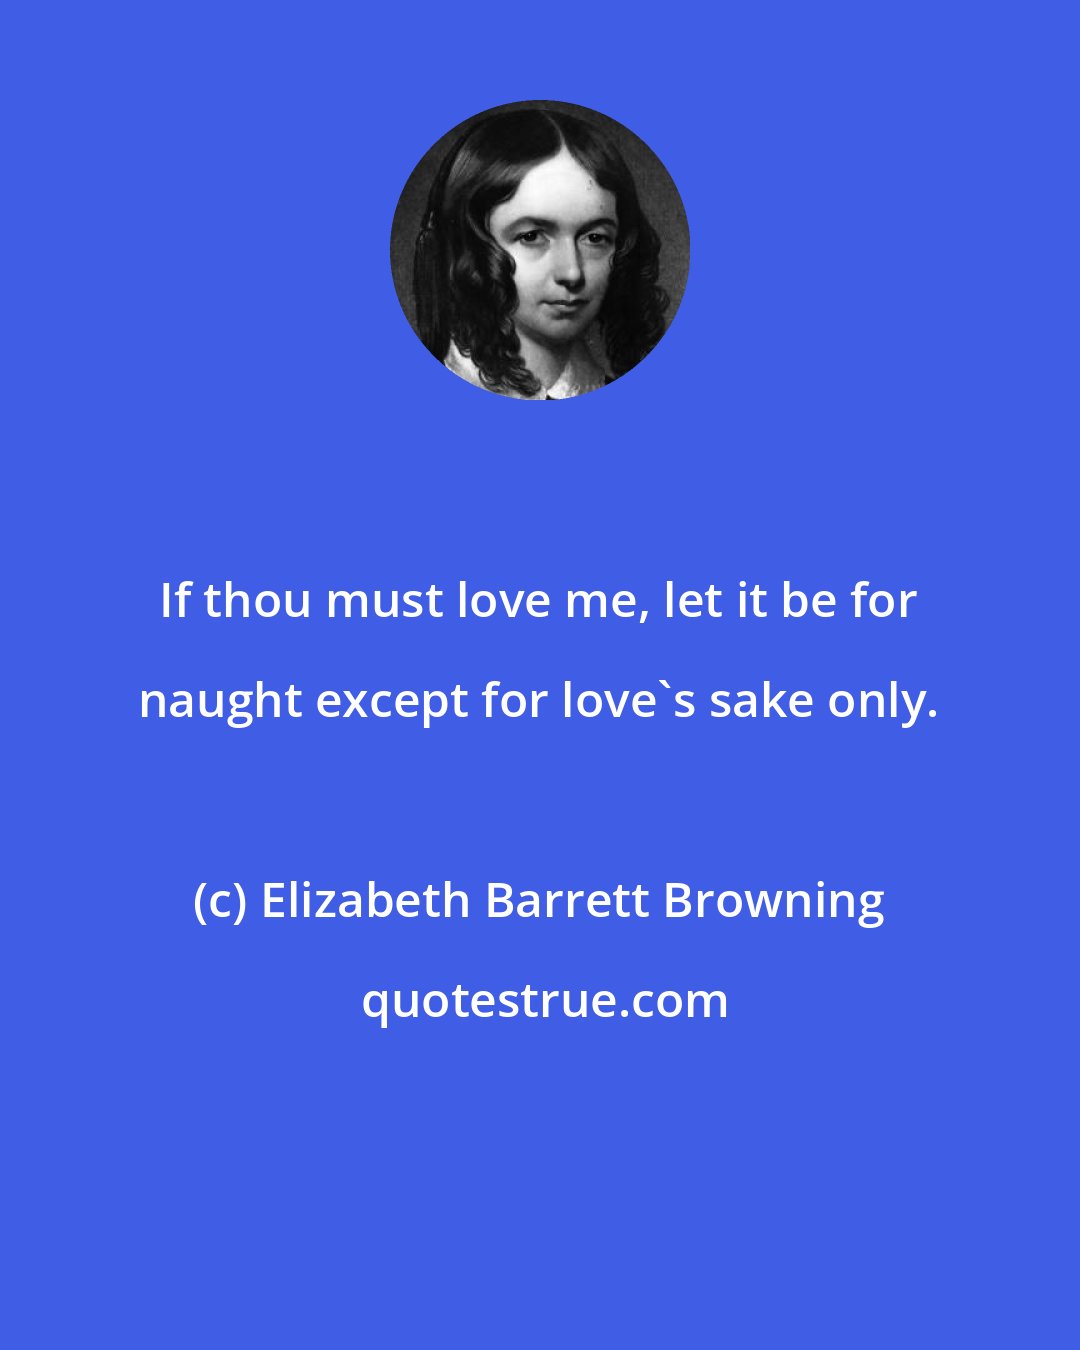 Elizabeth Barrett Browning: If thou must love me, let it be for naught except for love's sake only.